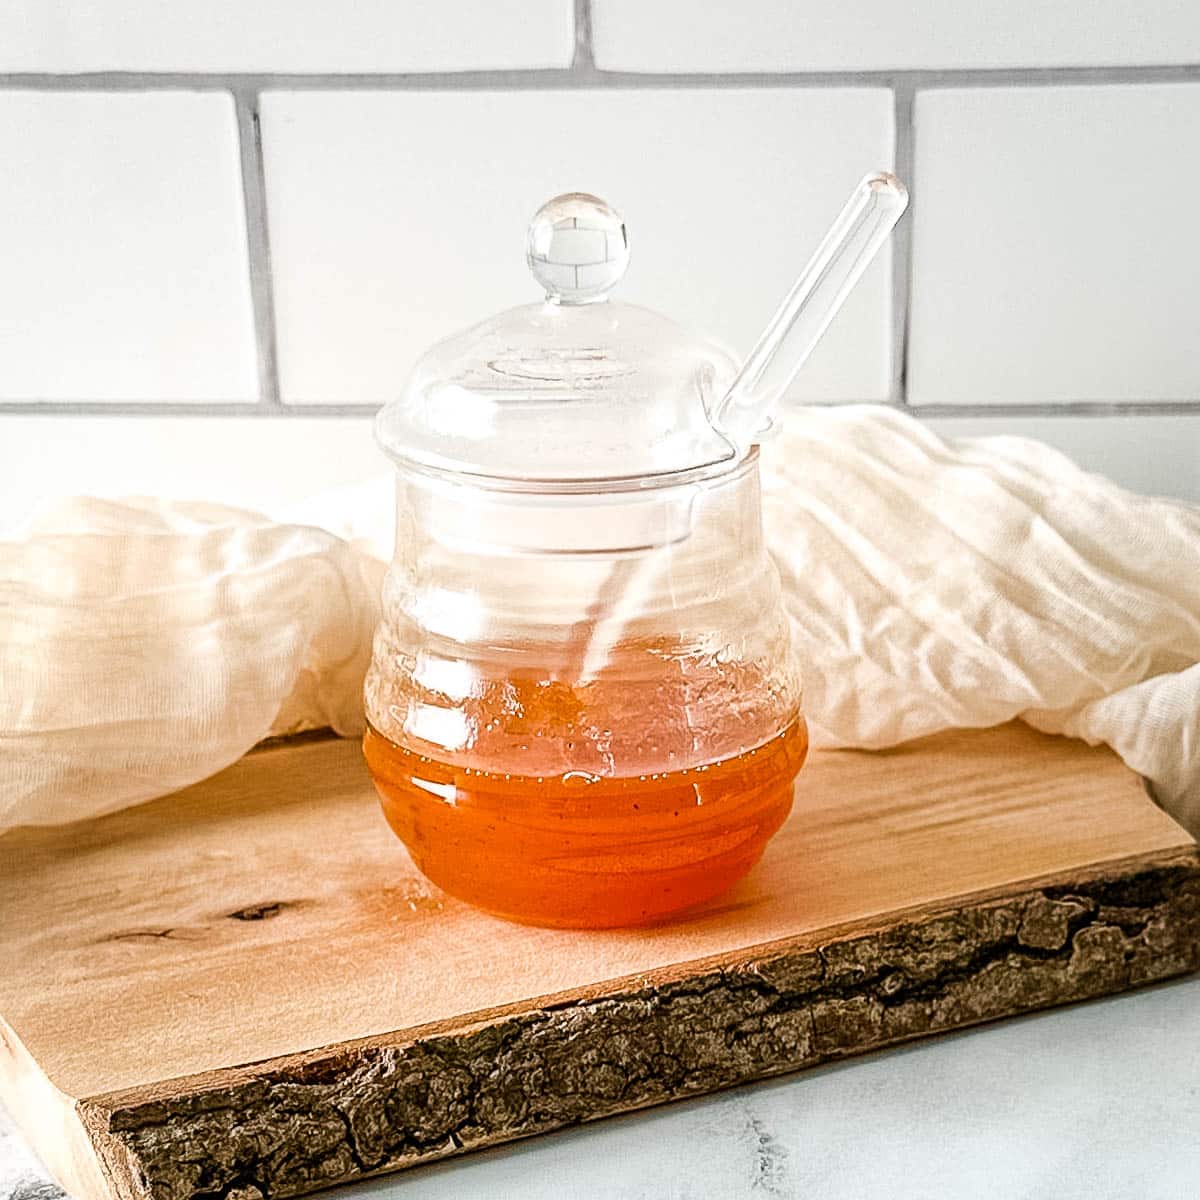 Hot honey sauce in a glass jar on a rustic wooden cutting board with a white linen.